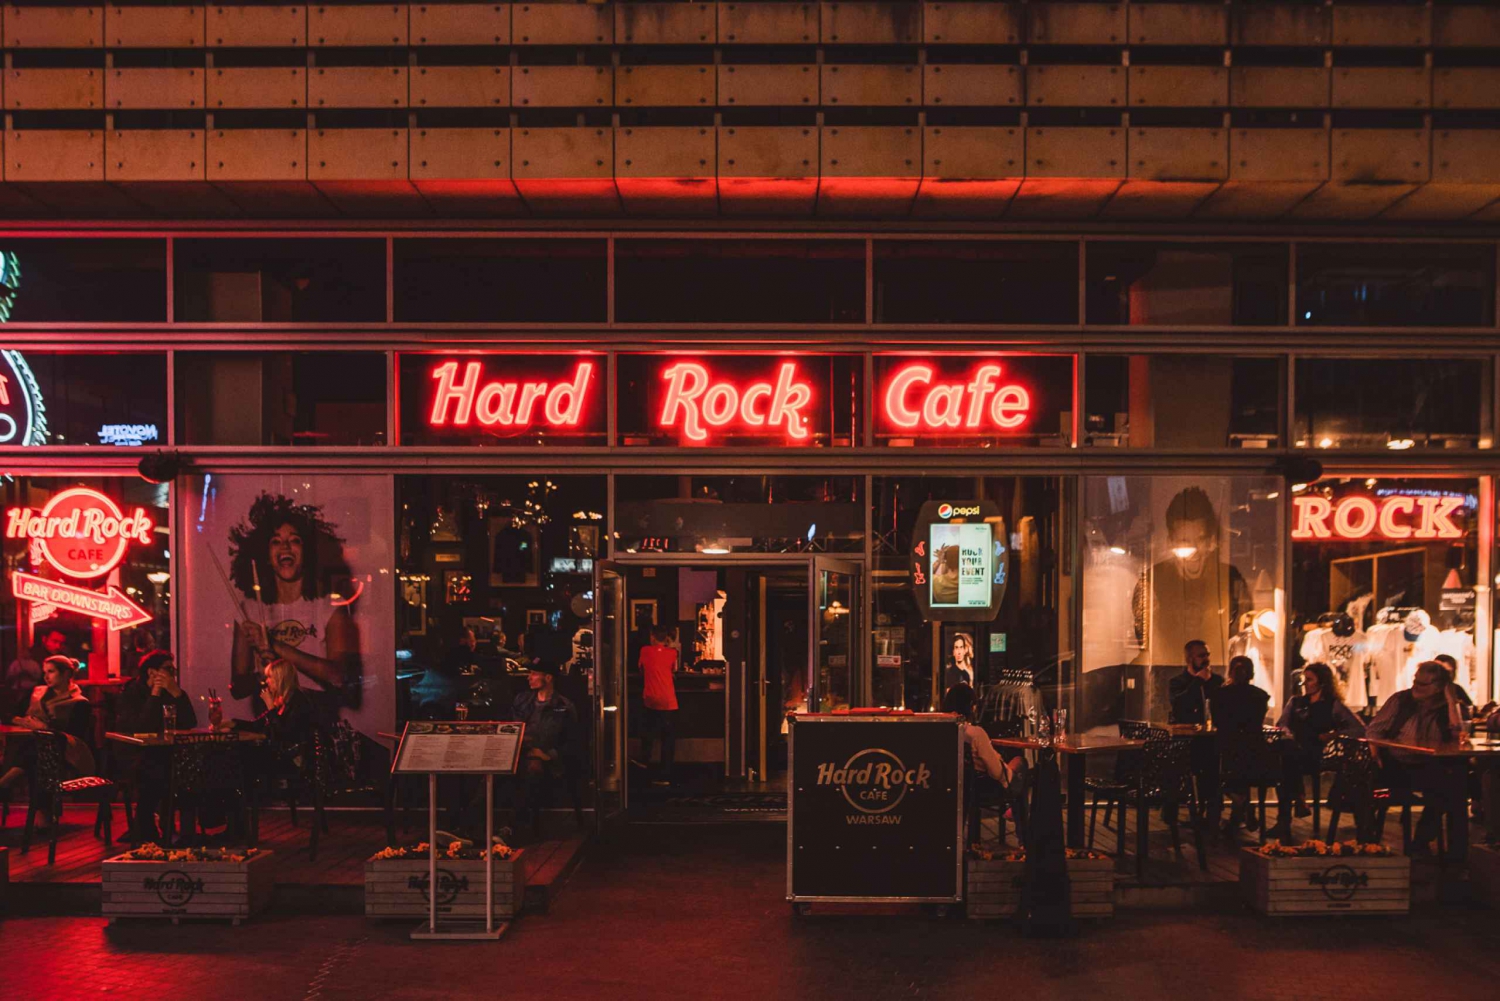 Warsaw: Lunch or Dinner at Hard Rock Cafe with Skip-the-Line